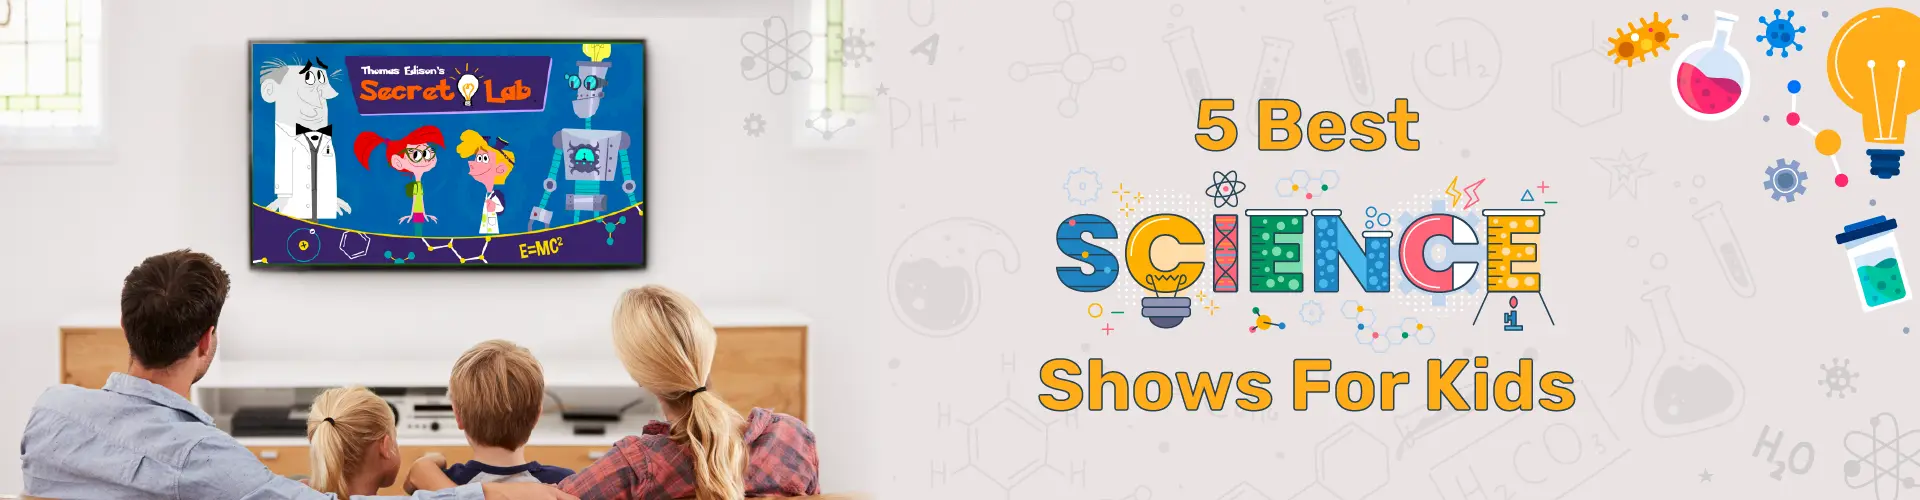 Best Science Shows For Kids